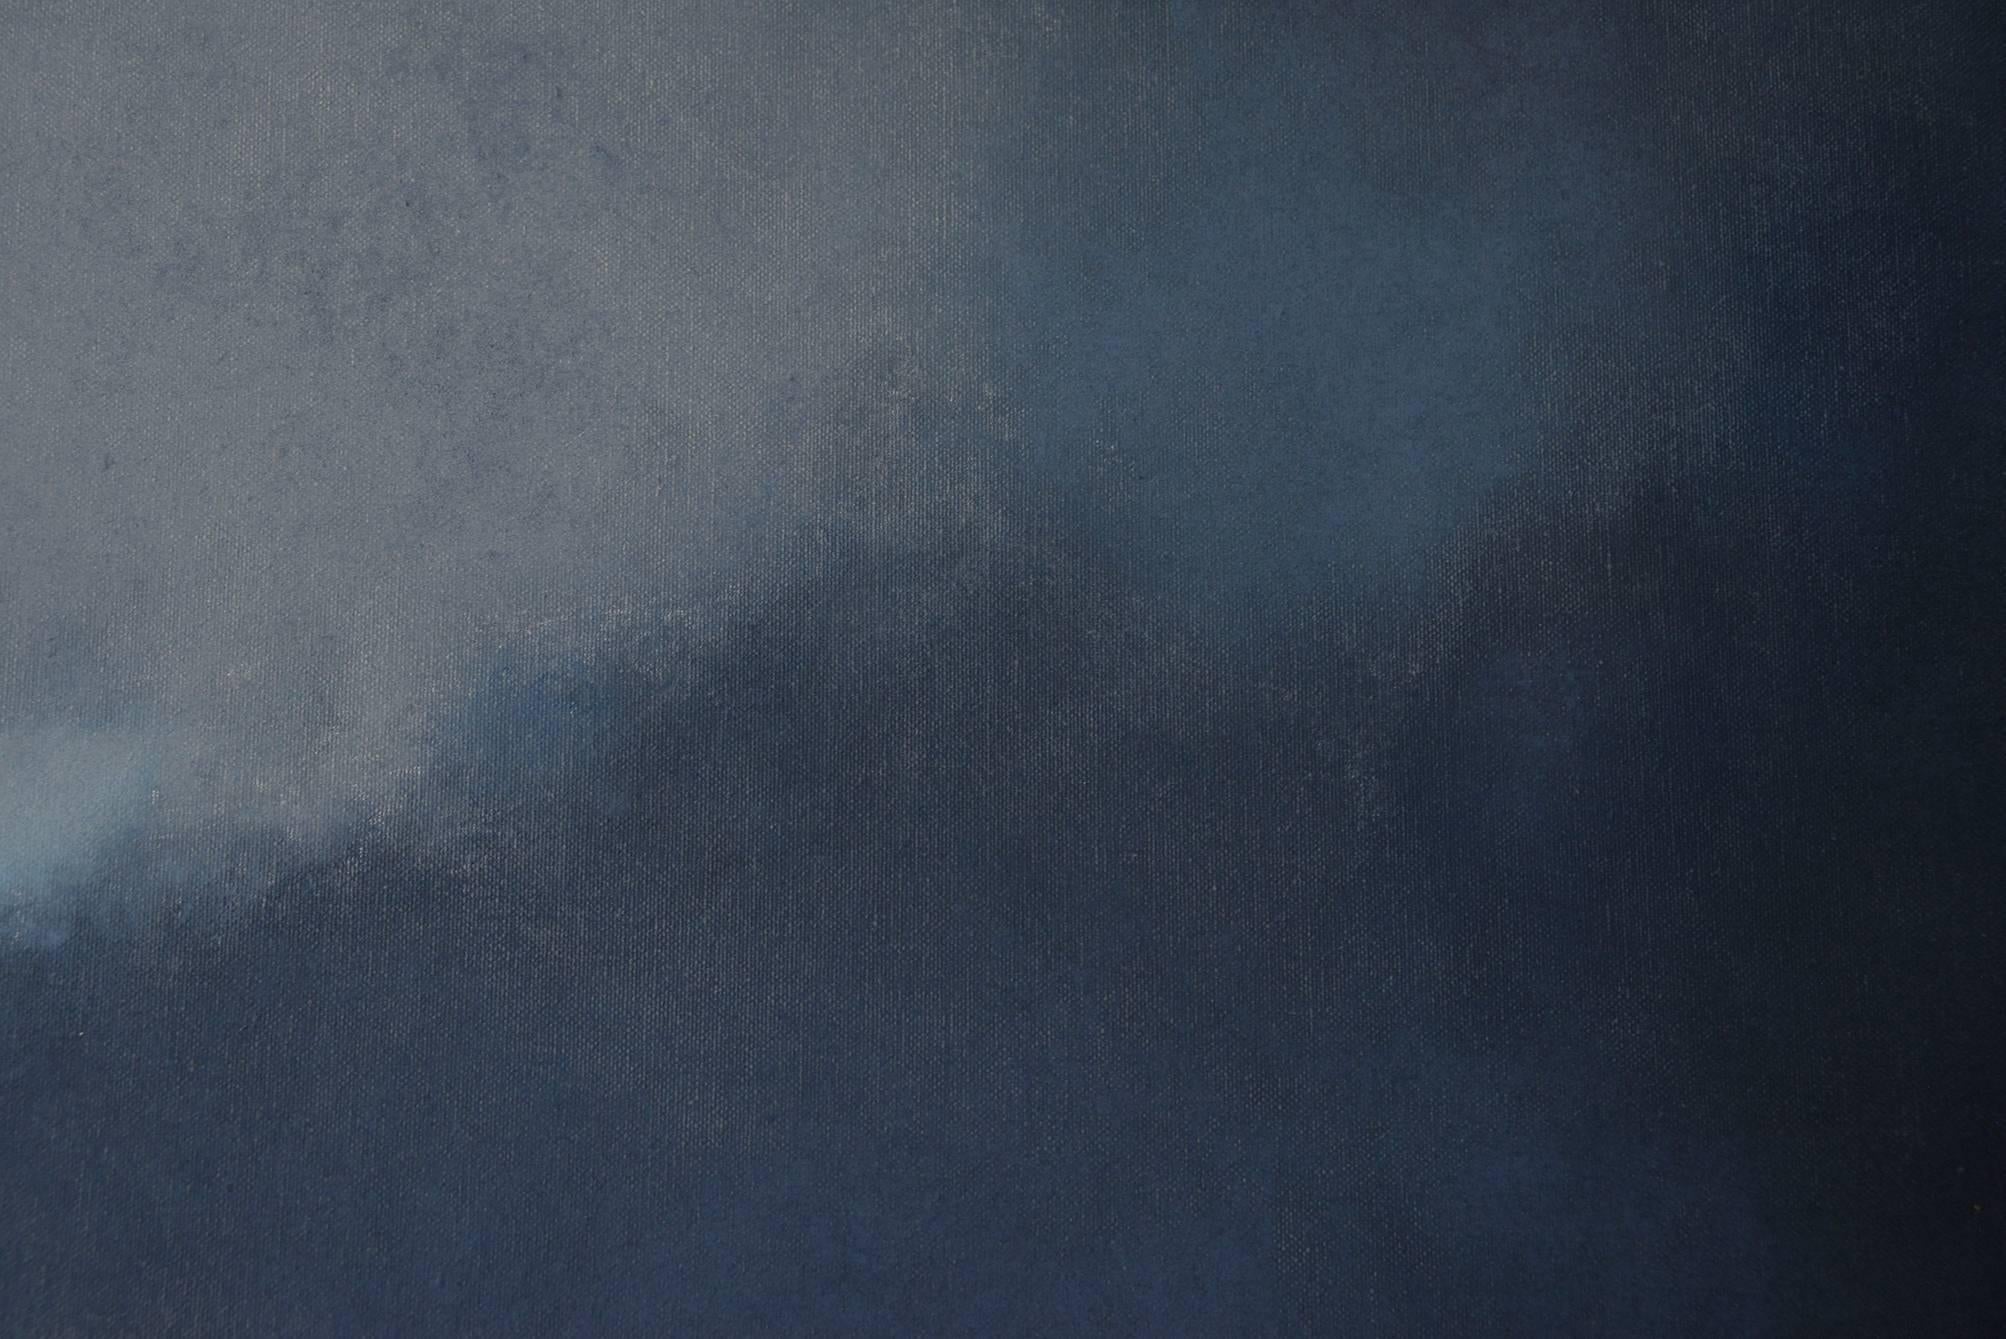 Silence, Dark Blue Grey Abstract Softcolored  - Painting by KC PAILLARD